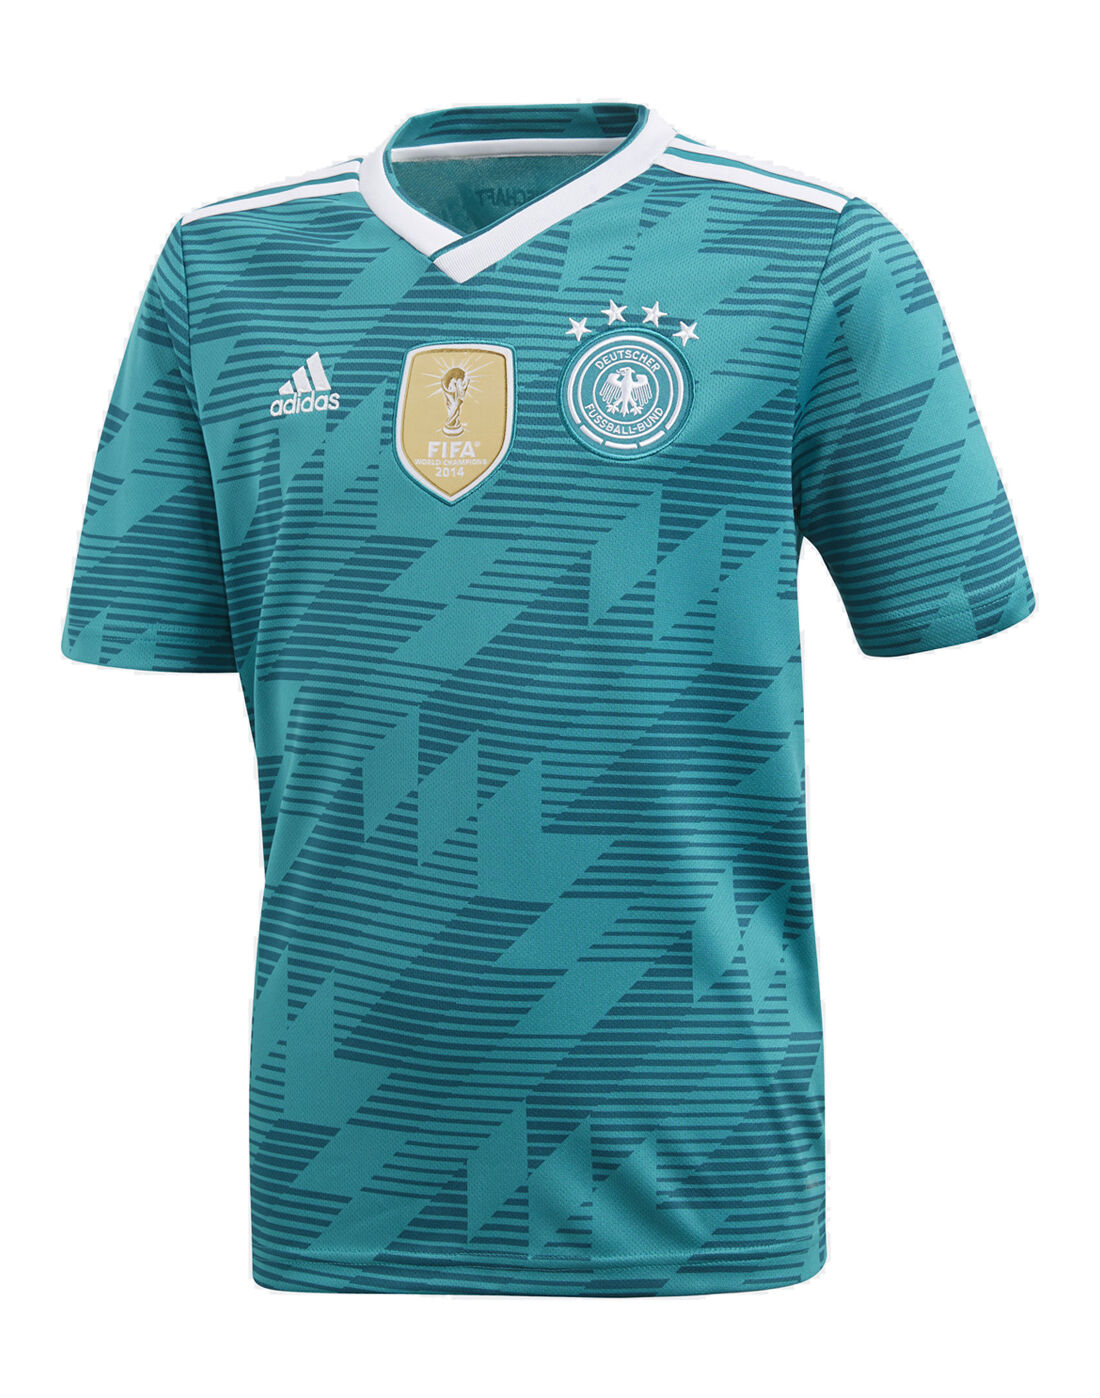 Germany World Cup 2018 Away Jersey 